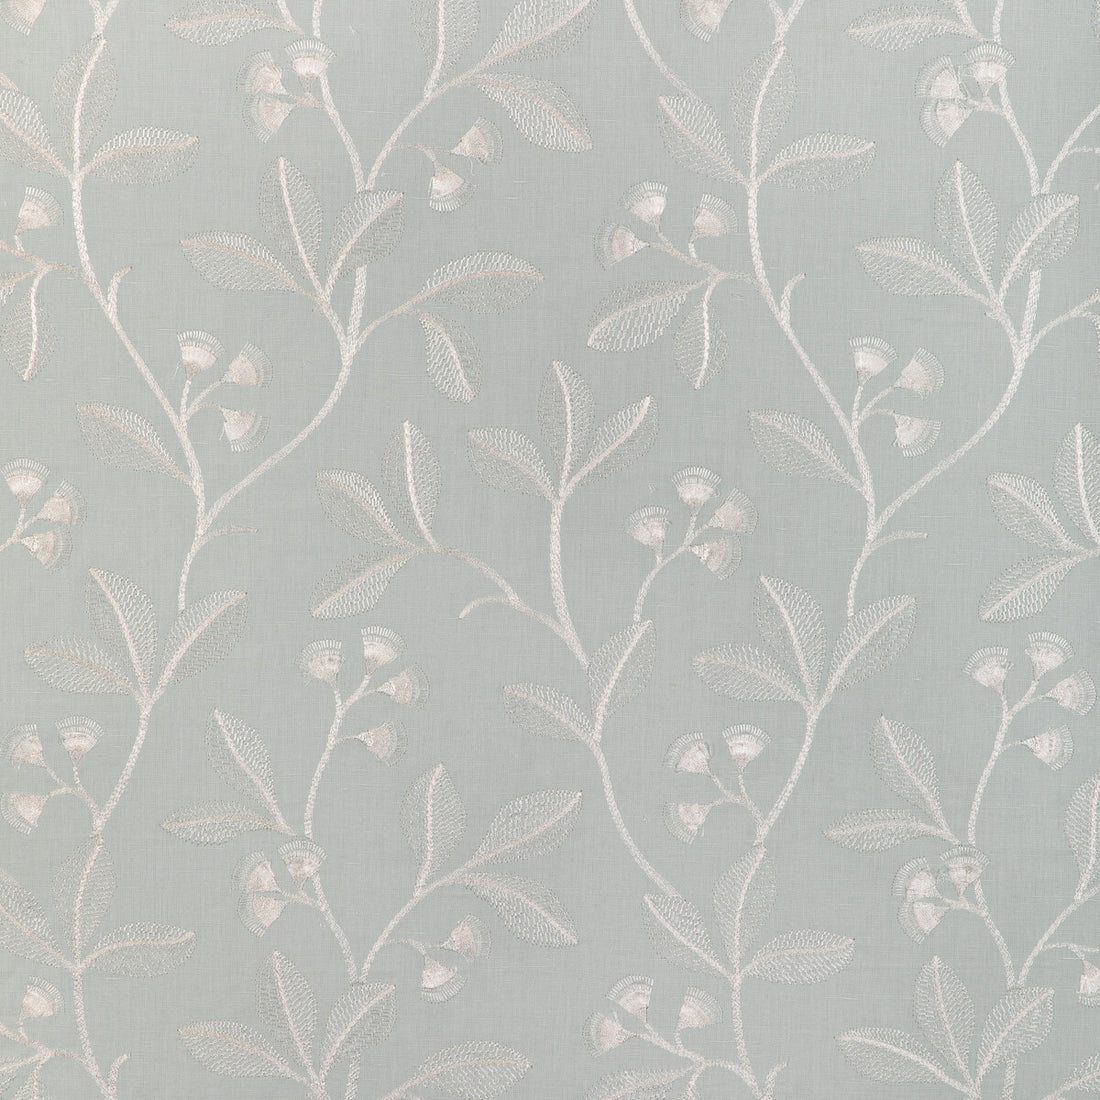 Iris Embroidery fabric in aqua color - pattern 2023144.13.0 - by Lee Jofa in the Garden Walk collection